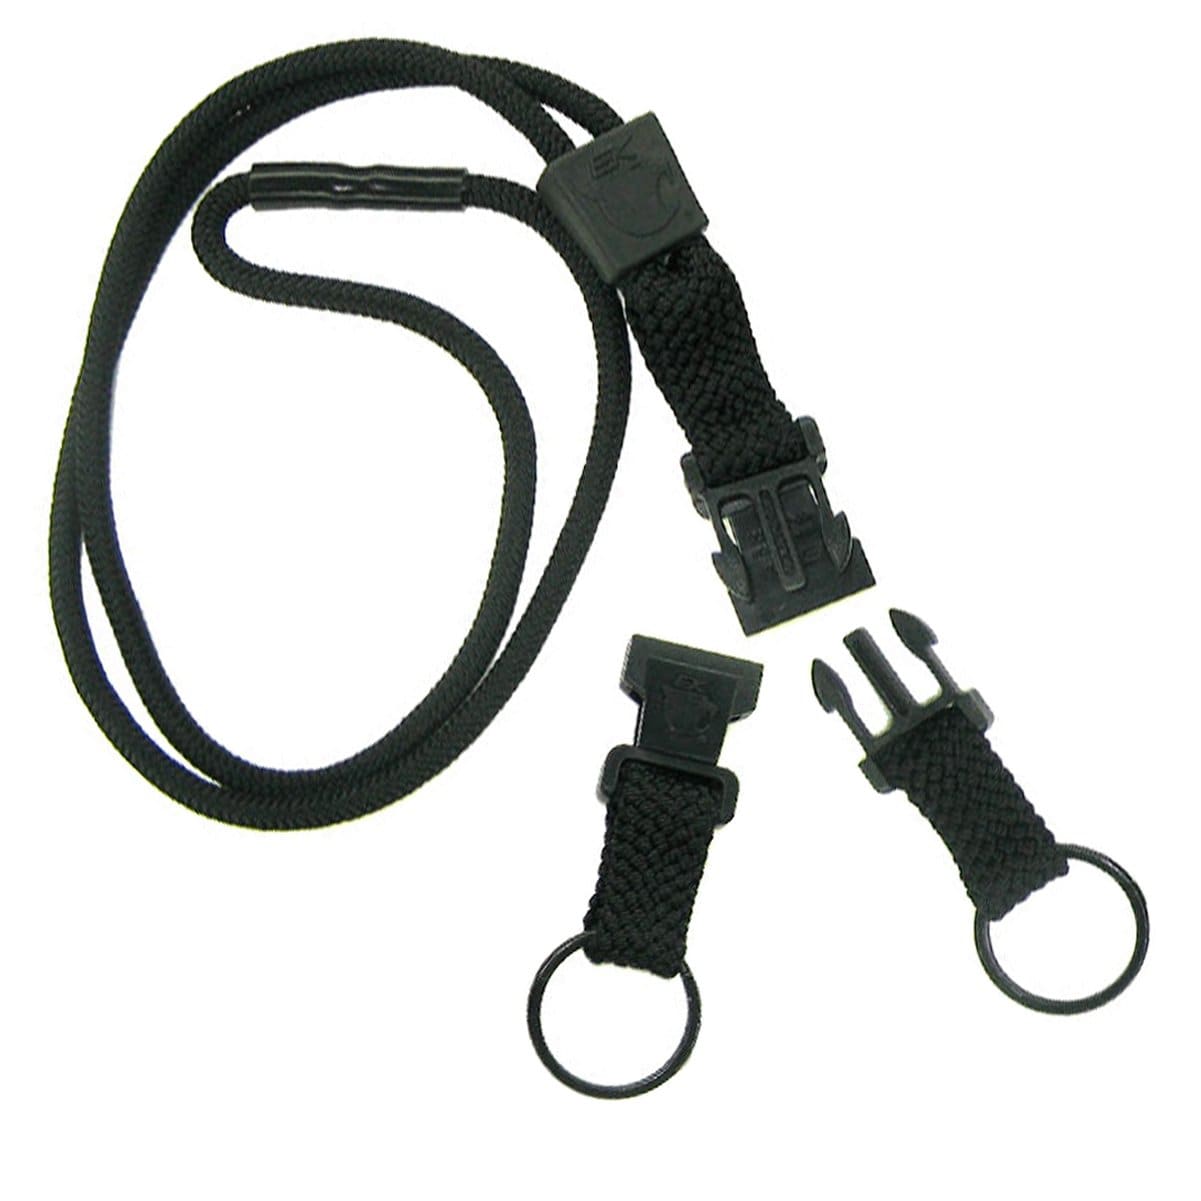 Keychains & Lanyards for sale in Enterprise, Nevada